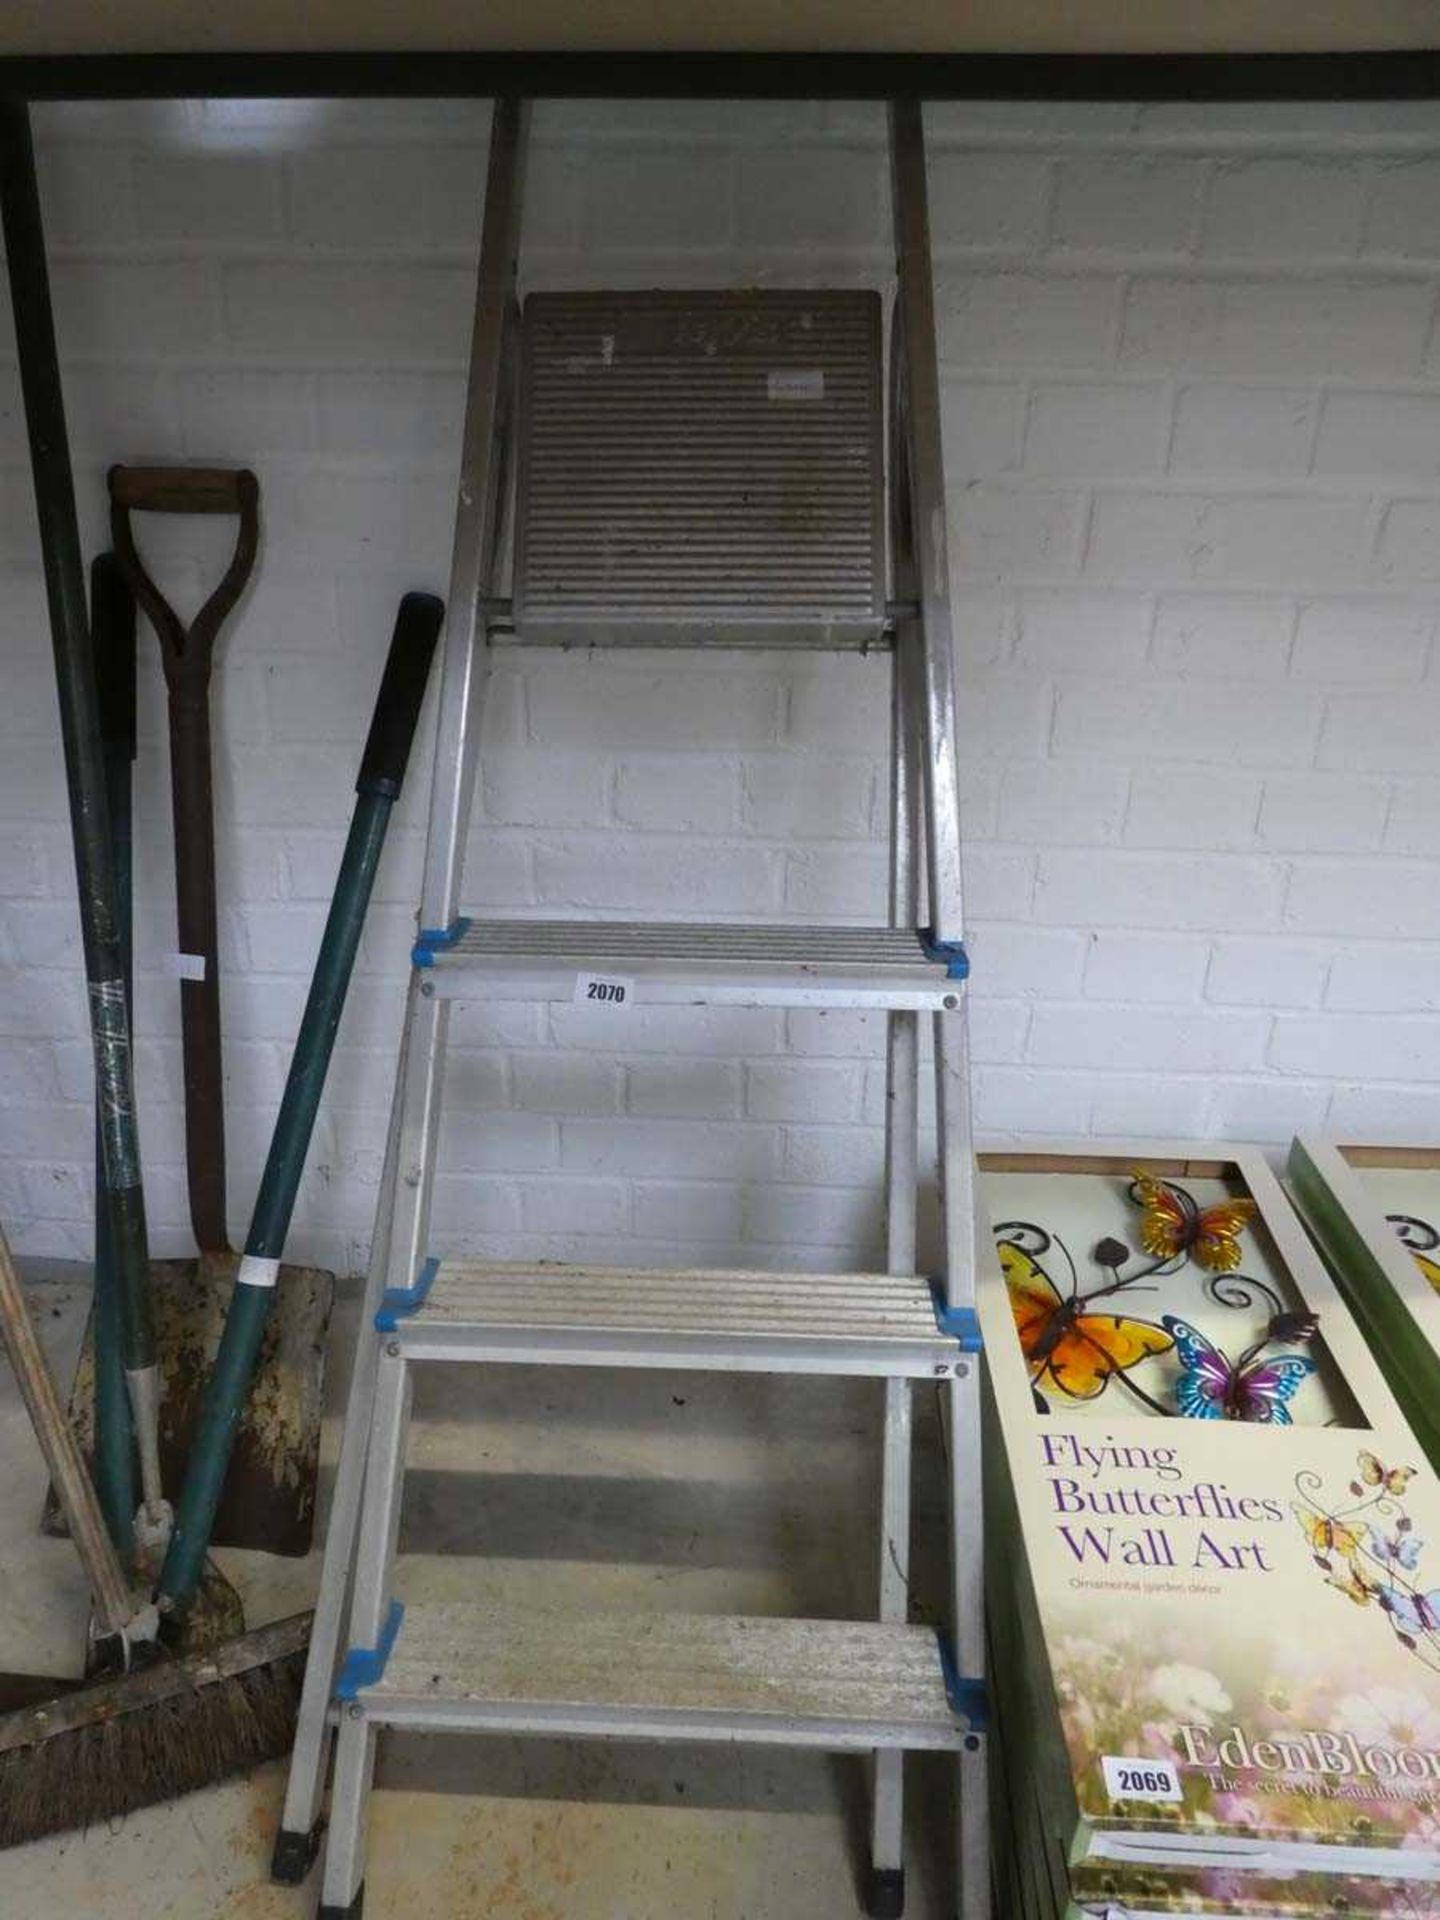 Aluminium 3 tread step ladder, together with a shovel, hoe, grass shears and broom